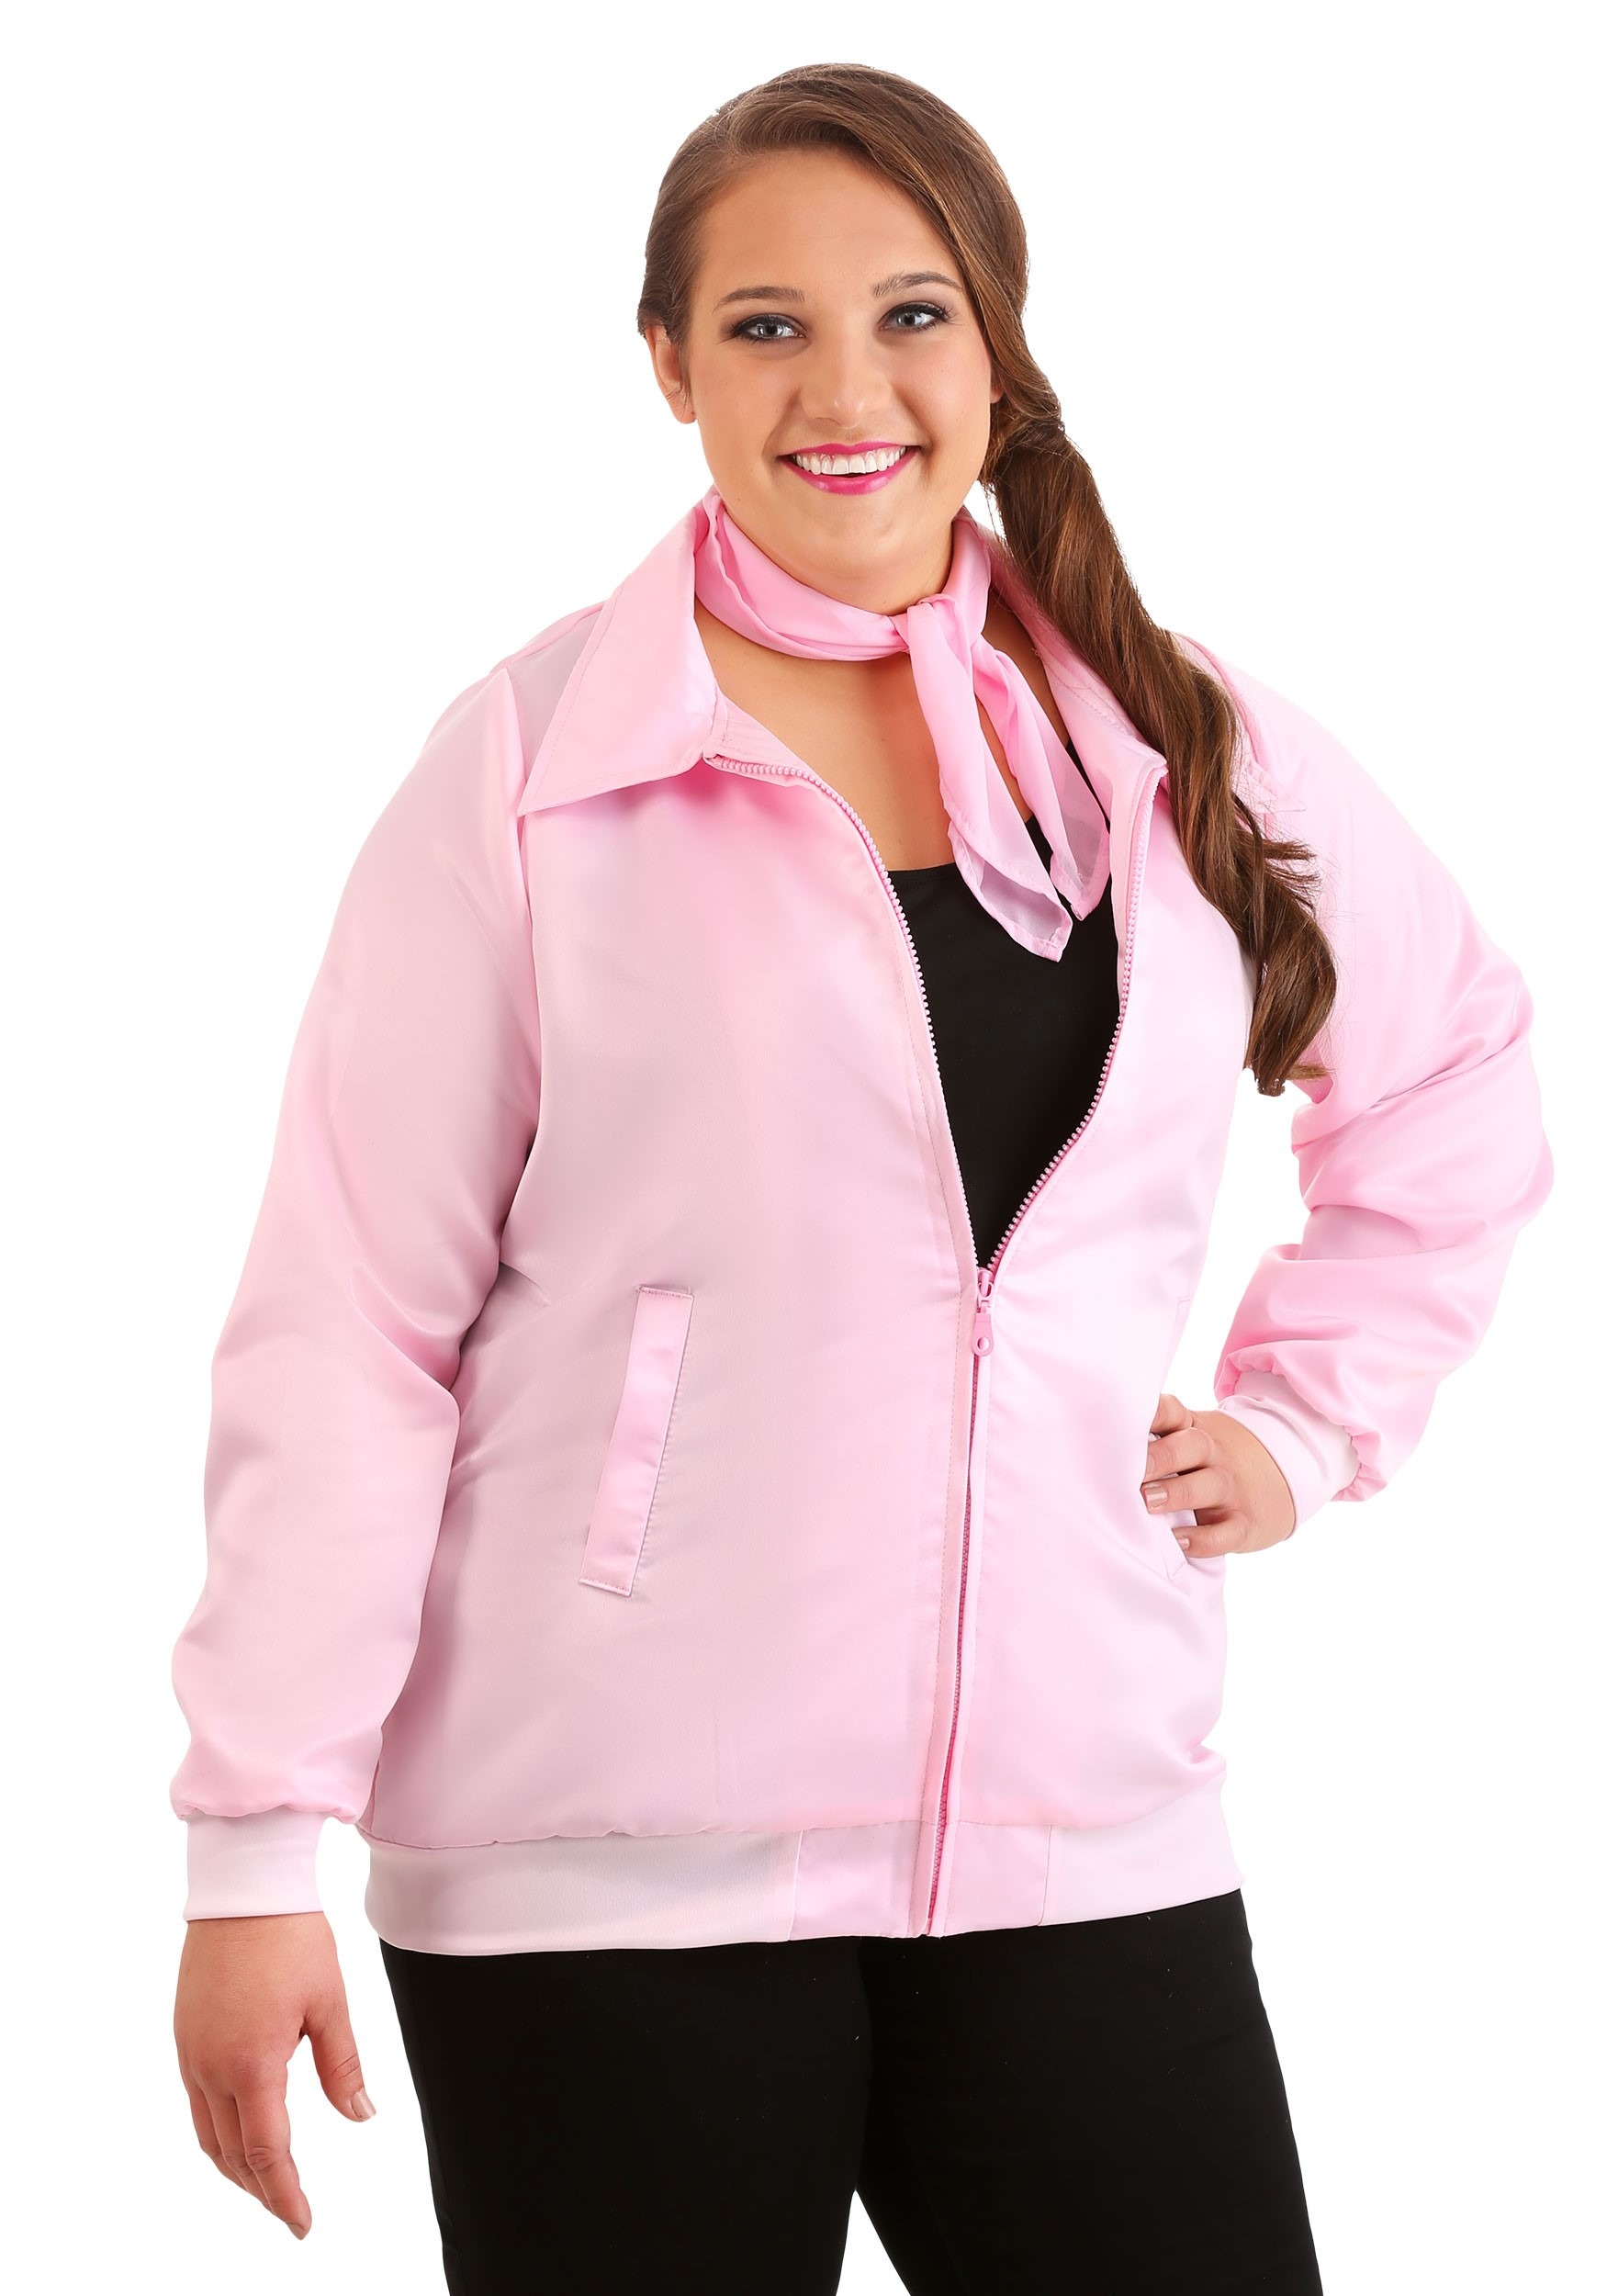 Photos - Fancy Dress FUN Costumes Plus Size Grease Pink Ladies Costume Jacket for Women Black&#